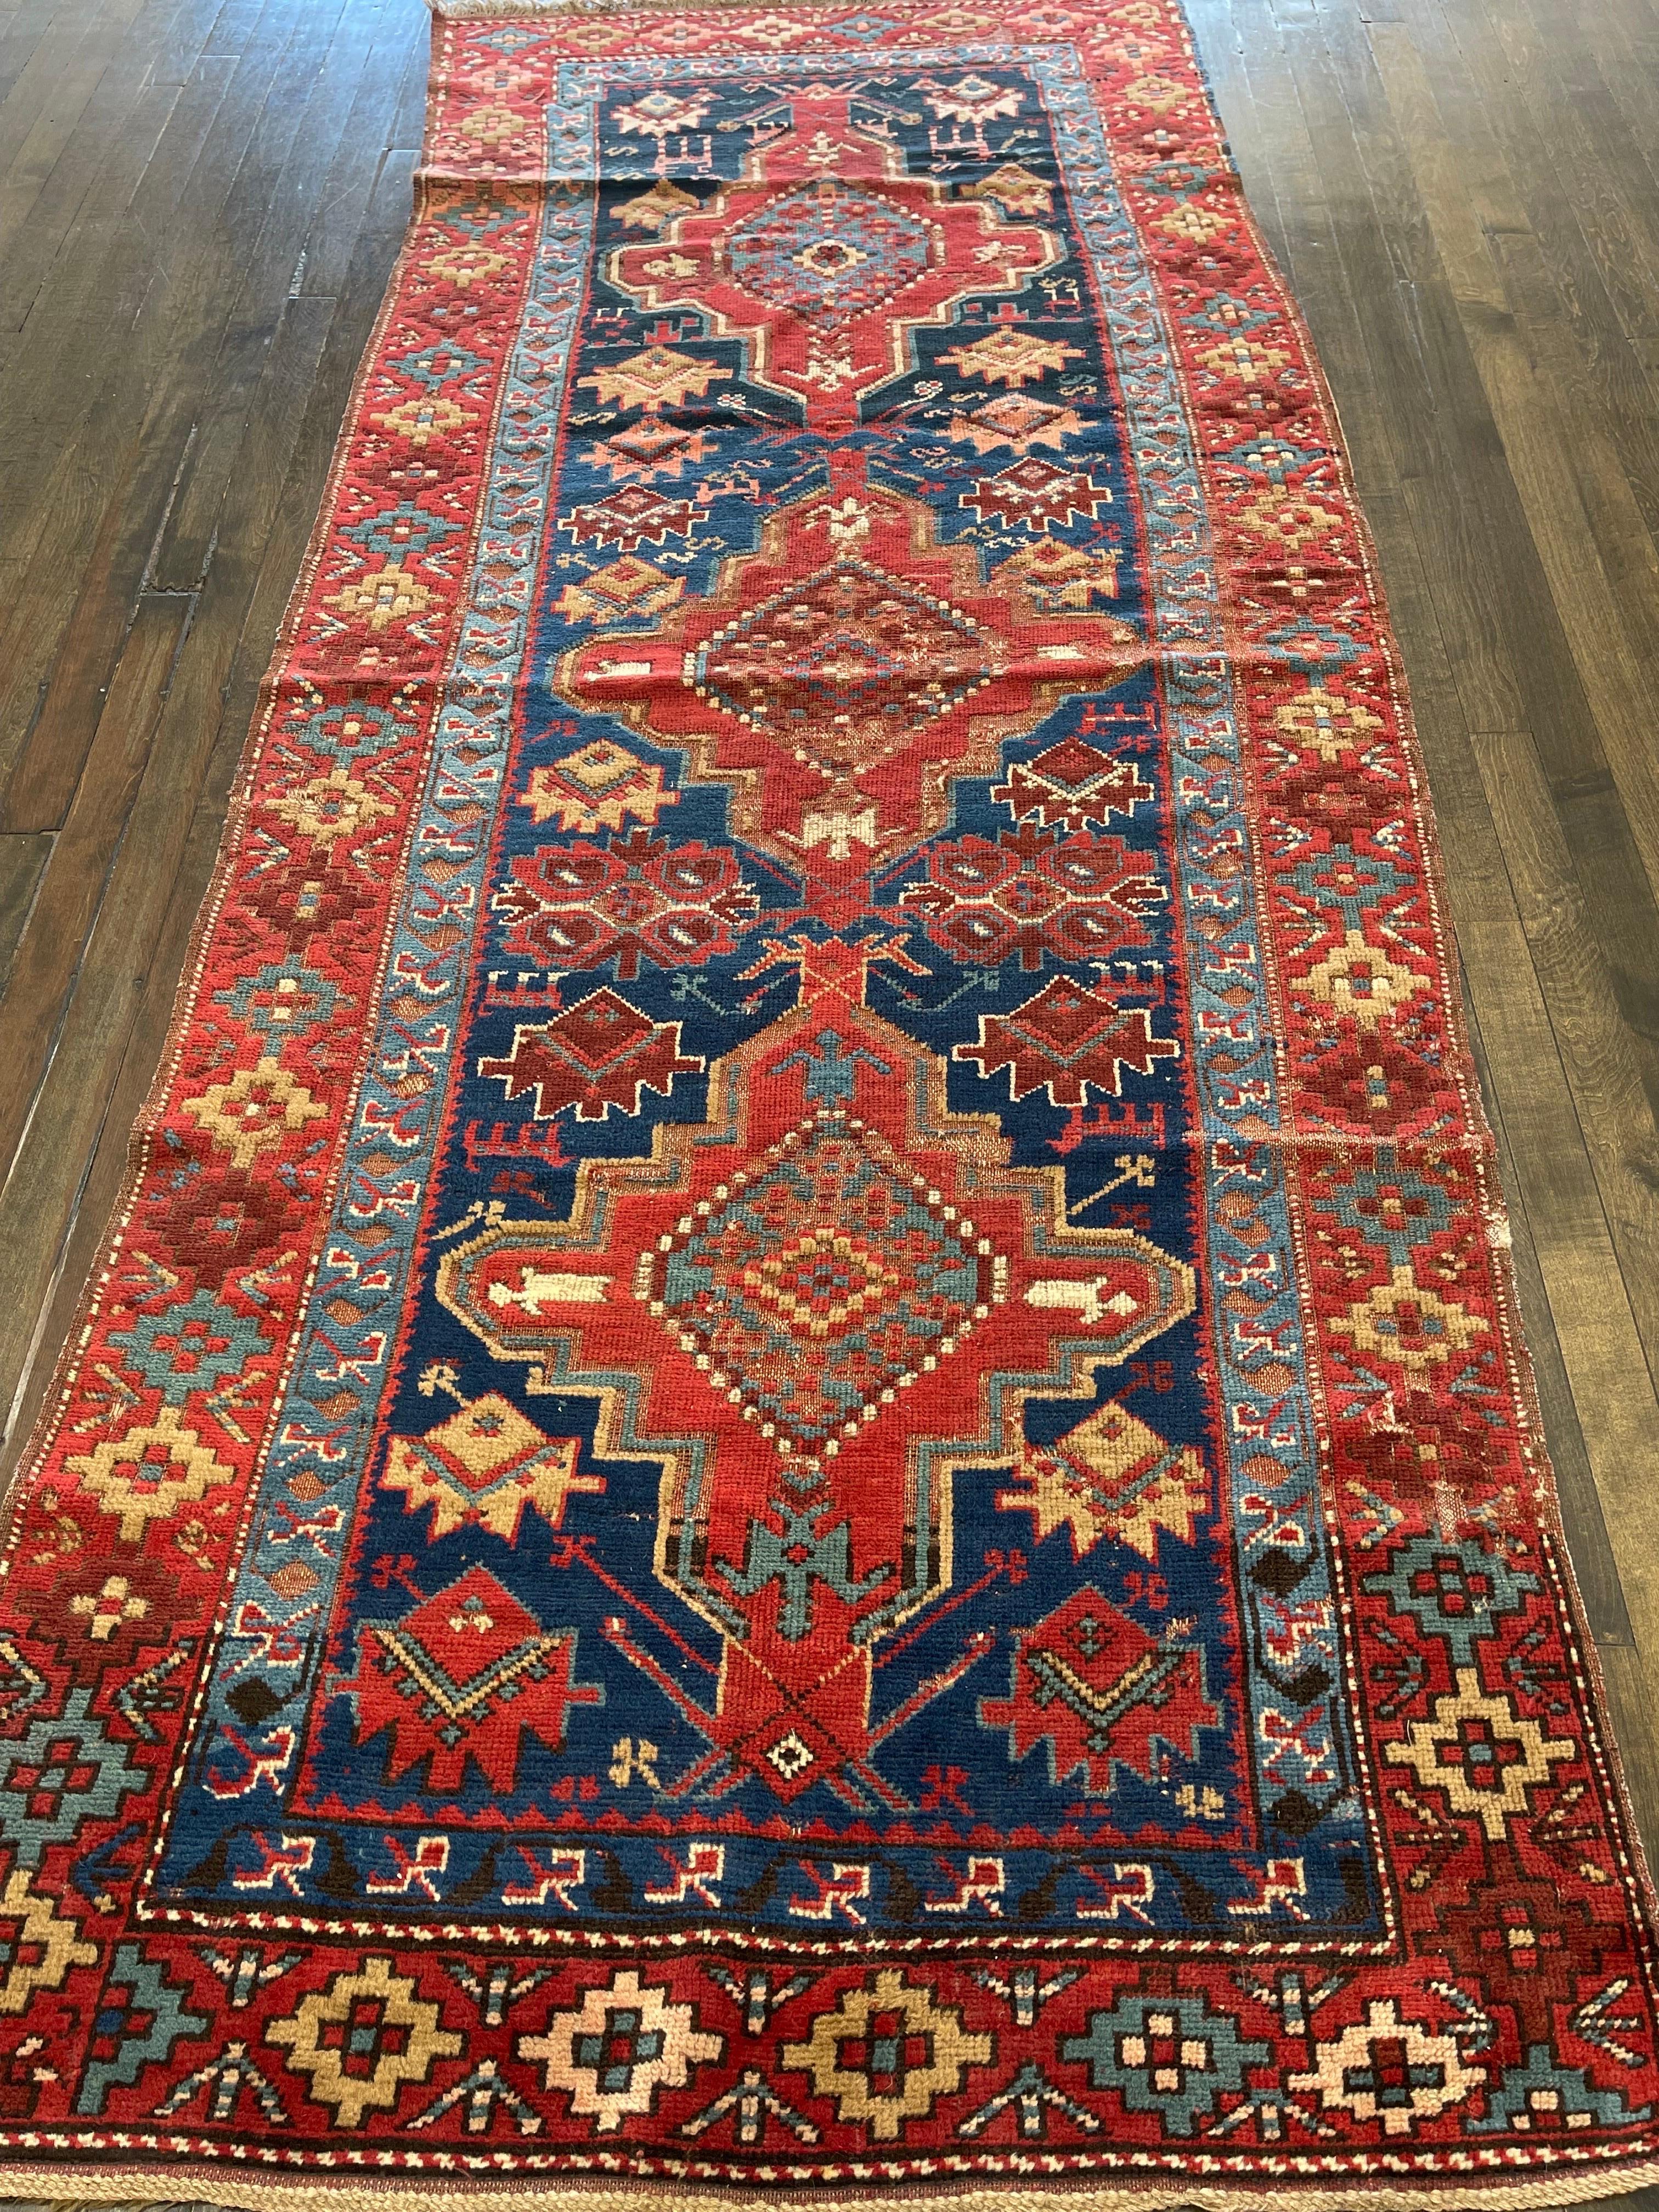 Gorgeous triple-medallion antique Kazak featuring three main medallions on a navy blue field and surrounded by a red/orange border. The rug is decorated with variety of small scattered motifs which gives it a cheerful and festive look. One can